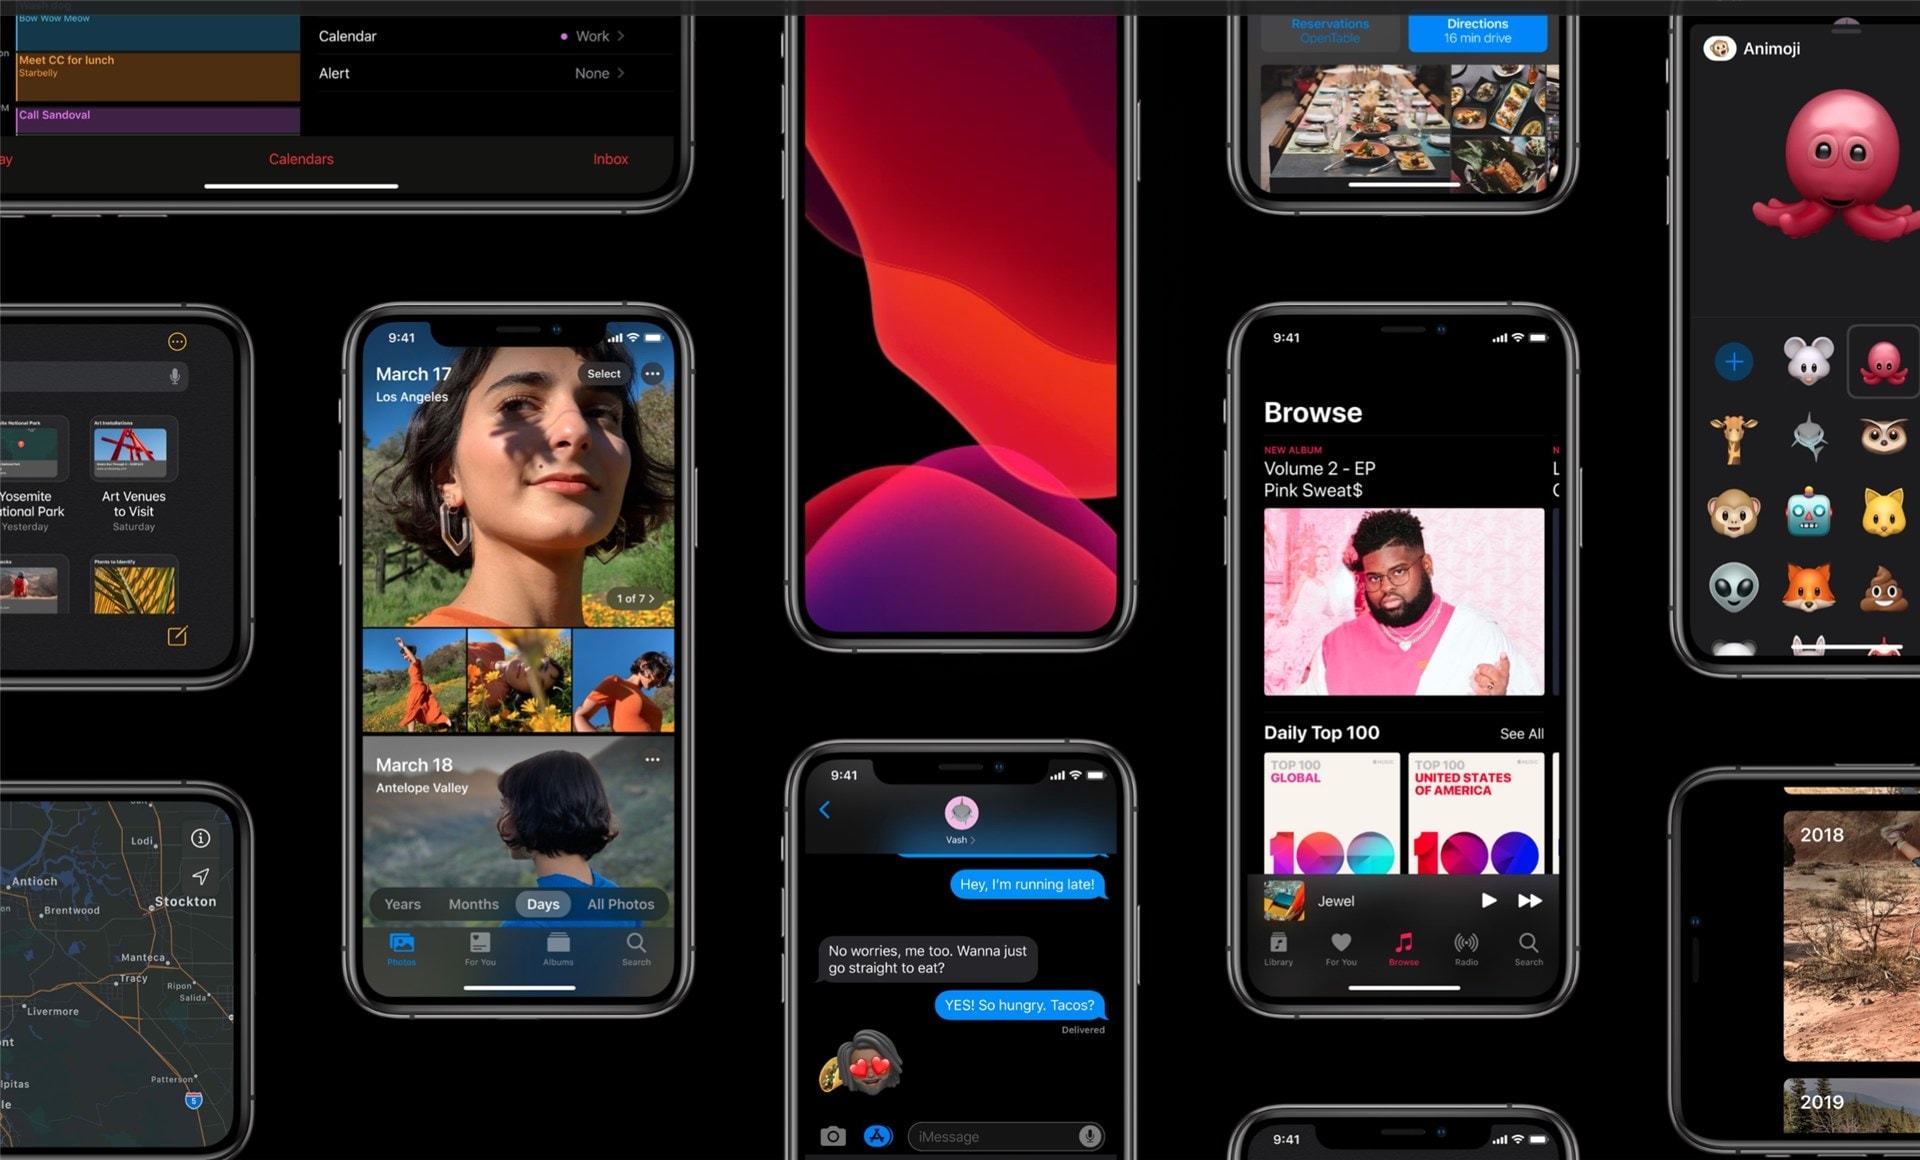 You can install iOS 13 Public Beta now